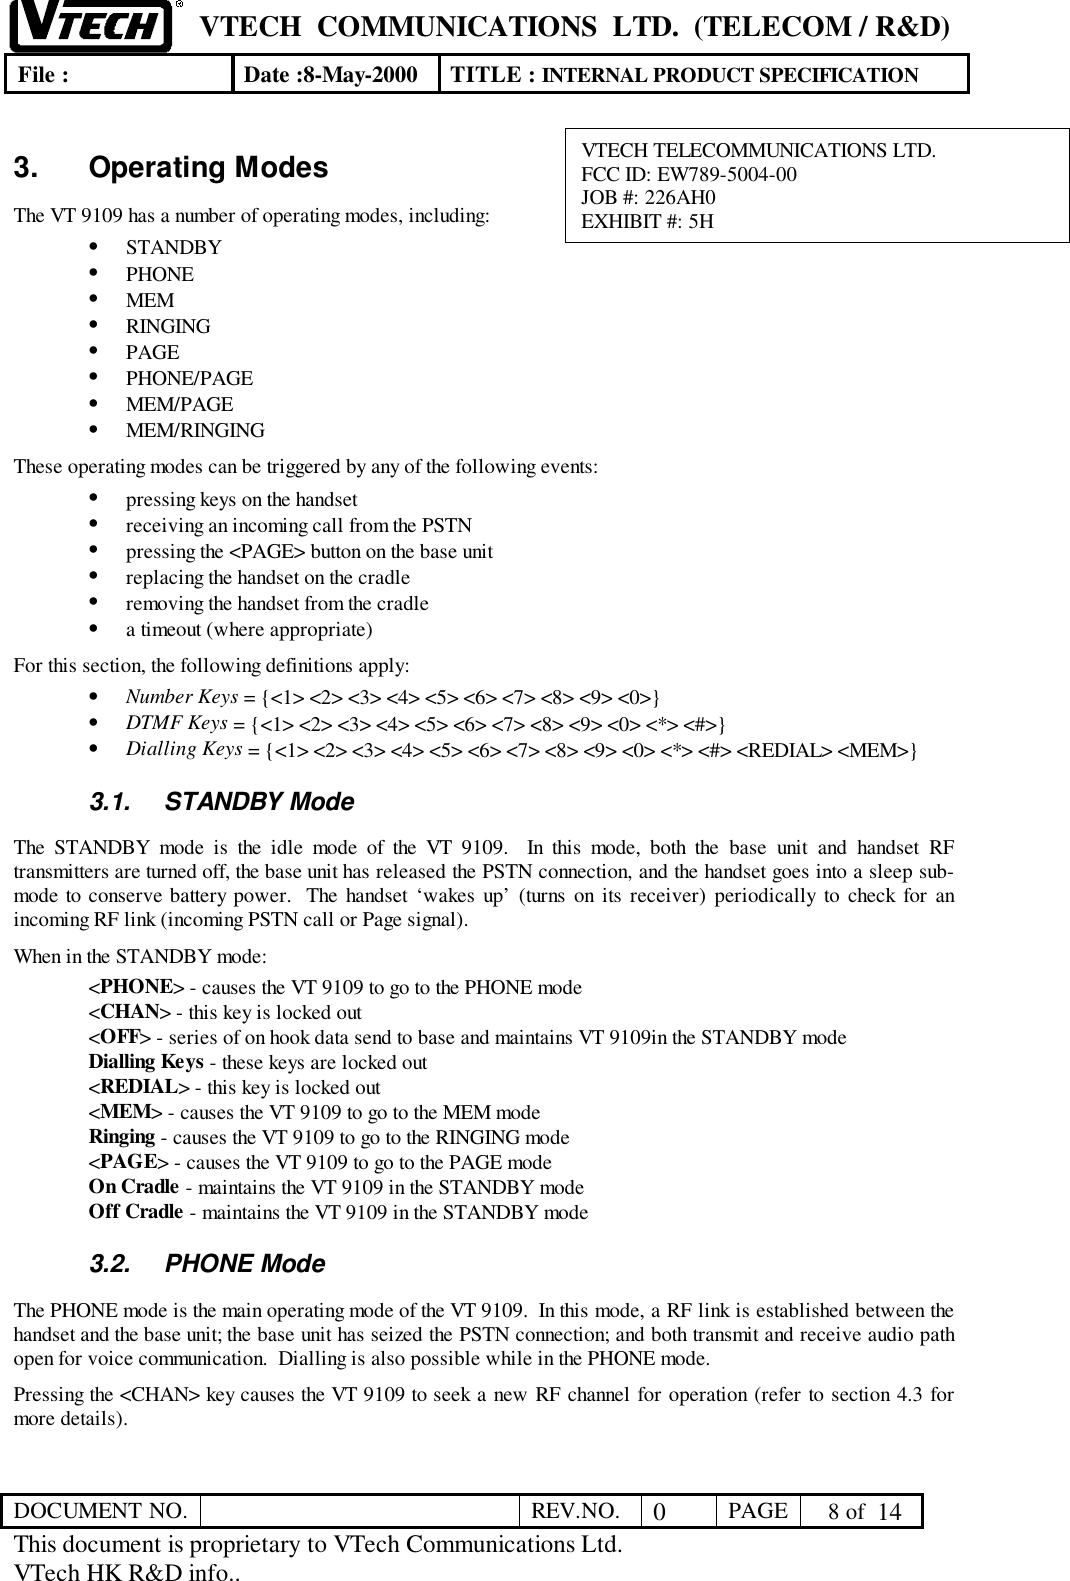 VTECH  COMMUNICATIONS  LTD.  (TELECOM / R&amp;D)File : Date :8-May-2000 TITLE : INTERNAL PRODUCT SPECIFICATIONDOCUMENT NO. REV.NO. 0PAGE  8 of  14This document is proprietary to VTech Communications Ltd.VTech HK R&amp;D info..3. Operating ModesThe VT 9109 has a number of operating modes, including:• STANDBY• PHONE• MEM• RINGING• PAGE• PHONE/PAGE• MEM/PAGE• MEM/RINGINGThese operating modes can be triggered by any of the following events:• pressing keys on the handset• receiving an incoming call from the PSTN• pressing the &lt;PAGE&gt; button on the base unit• replacing the handset on the cradle• removing the handset from the cradle• a timeout (where appropriate)For this section, the following definitions apply:• Number Keys = {&lt;1&gt; &lt;2&gt; &lt;3&gt; &lt;4&gt; &lt;5&gt; &lt;6&gt; &lt;7&gt; &lt;8&gt; &lt;9&gt; &lt;0&gt;}• DTMF Keys = {&lt;1&gt; &lt;2&gt; &lt;3&gt; &lt;4&gt; &lt;5&gt; &lt;6&gt; &lt;7&gt; &lt;8&gt; &lt;9&gt; &lt;0&gt; &lt;*&gt; &lt;#&gt;}• Dialling Keys = {&lt;1&gt; &lt;2&gt; &lt;3&gt; &lt;4&gt; &lt;5&gt; &lt;6&gt; &lt;7&gt; &lt;8&gt; &lt;9&gt; &lt;0&gt; &lt;*&gt; &lt;#&gt; &lt;REDIAL&gt; &lt;MEM&gt;}3.1. STANDBY ModeThe STANDBY mode is the idle mode of the VT 9109.  In this mode, both the base unit and handset RFtransmitters are turned off, the base unit has released the PSTN connection, and the handset goes into a sleep sub-mode to conserve battery power.  The handset ‘wakes up’ (turns on its receiver) periodically to check for anincoming RF link (incoming PSTN call or Page signal).When in the STANDBY mode:&lt;PHONE&gt; - causes the VT 9109 to go to the PHONE mode&lt;CHAN&gt; - this key is locked out&lt;OFF&gt; - series of on hook data send to base and maintains VT 9109in the STANDBY modeDialling Keys - these keys are locked out&lt;REDIAL&gt; - this key is locked out&lt;MEM&gt; - causes the VT 9109 to go to the MEM modeRinging - causes the VT 9109 to go to the RINGING mode&lt;PAGE&gt; - causes the VT 9109 to go to the PAGE modeOn Cradle - maintains the VT 9109 in the STANDBY modeOff Cradle - maintains the VT 9109 in the STANDBY mode3.2. PHONE ModeThe PHONE mode is the main operating mode of the VT 9109.  In this mode, a RF link is established between thehandset and the base unit; the base unit has seized the PSTN connection; and both transmit and receive audio pathopen for voice communication.  Dialling is also possible while in the PHONE mode.Pressing the &lt;CHAN&gt; key causes the VT 9109 to seek a new RF channel for operation (refer to section 4.3 formore details).VTECH TELECOMMUNICATIONS LTD.FCC ID: EW789-5004-00JOB #: 226AH0EXHIBIT #: 5H